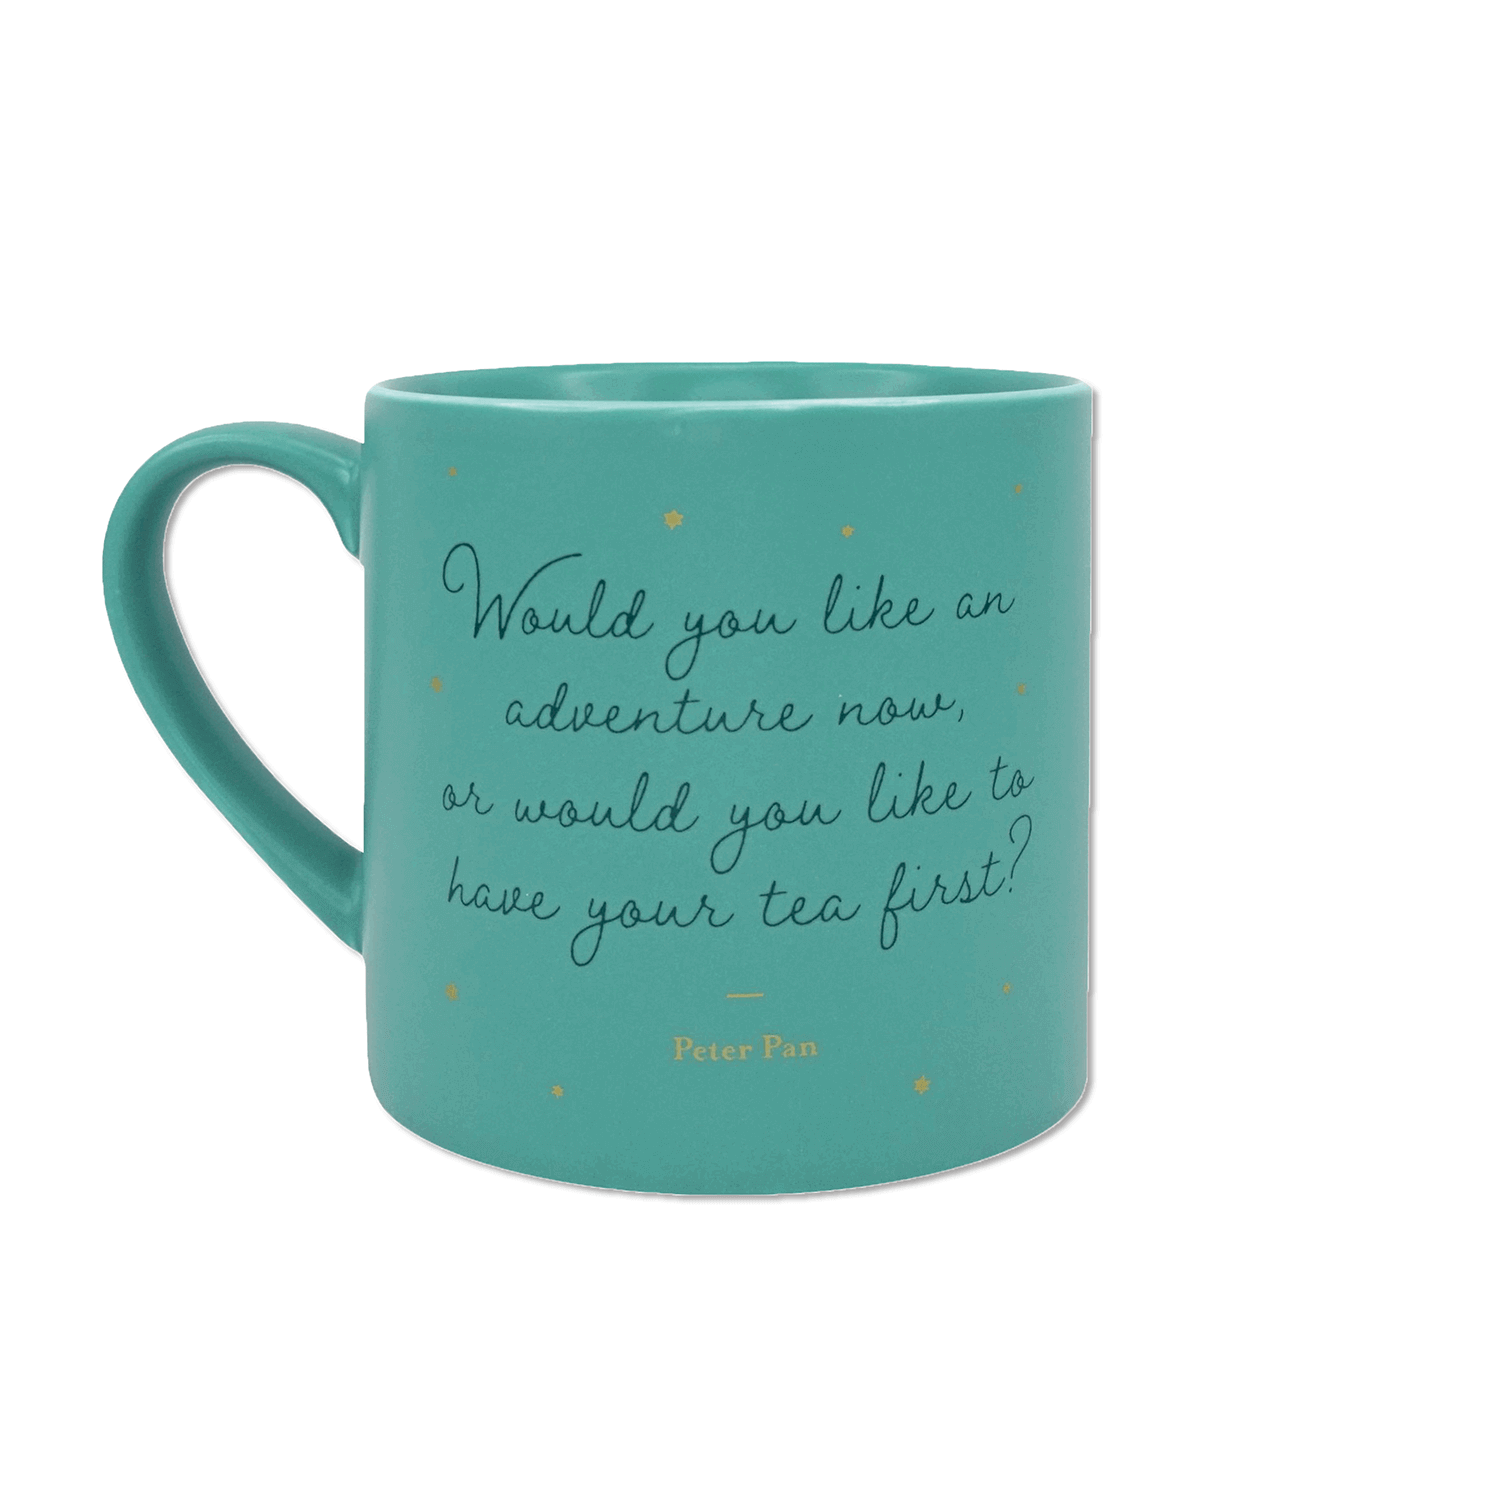 Would you like an adventure now or would you like to have your tea first quote mug